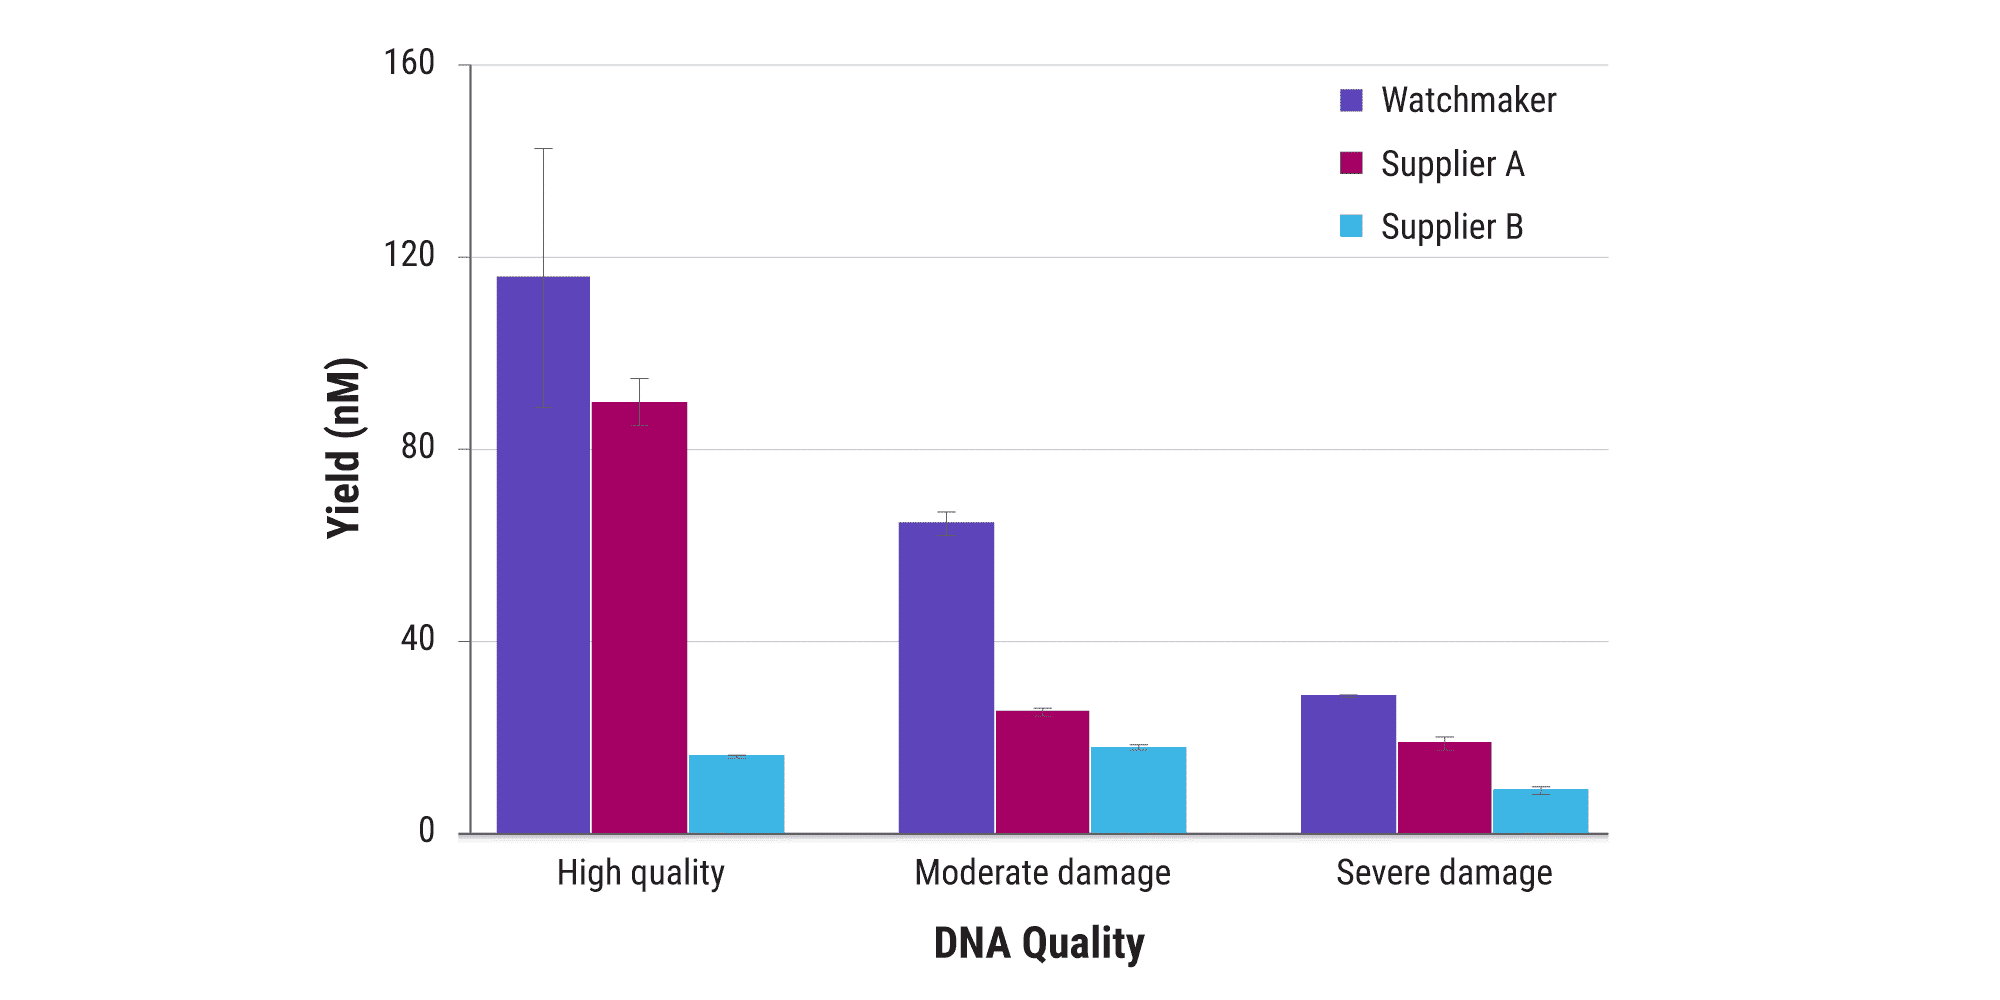 Figure 4B. Efficient library preparation across a wide range of sample qualities. Libraries were constructed in duplicate from 25 ng of either high-quality or formalin-compromised DNA of moderate to severe damage (HD799 and HD803, respectively; Horizon Discovery) using the Watchmaker DNA Library Prep Kit or two competitor enzymatic fragmentation kits. High-quality DNA fragmentation times were selected to target final library sizes of approximately 500 bp per manufacturer’s published recommendations (5, 10, and 10 minutes at 37℃, respectively). Damaged DNA fragmentation times were fixed at 10 minutes at 37℃. All libraries were amplified for 6 PCR cycles. Final library distributions and yields were assessed using a D1000 assay by TapeStation (Agilent).